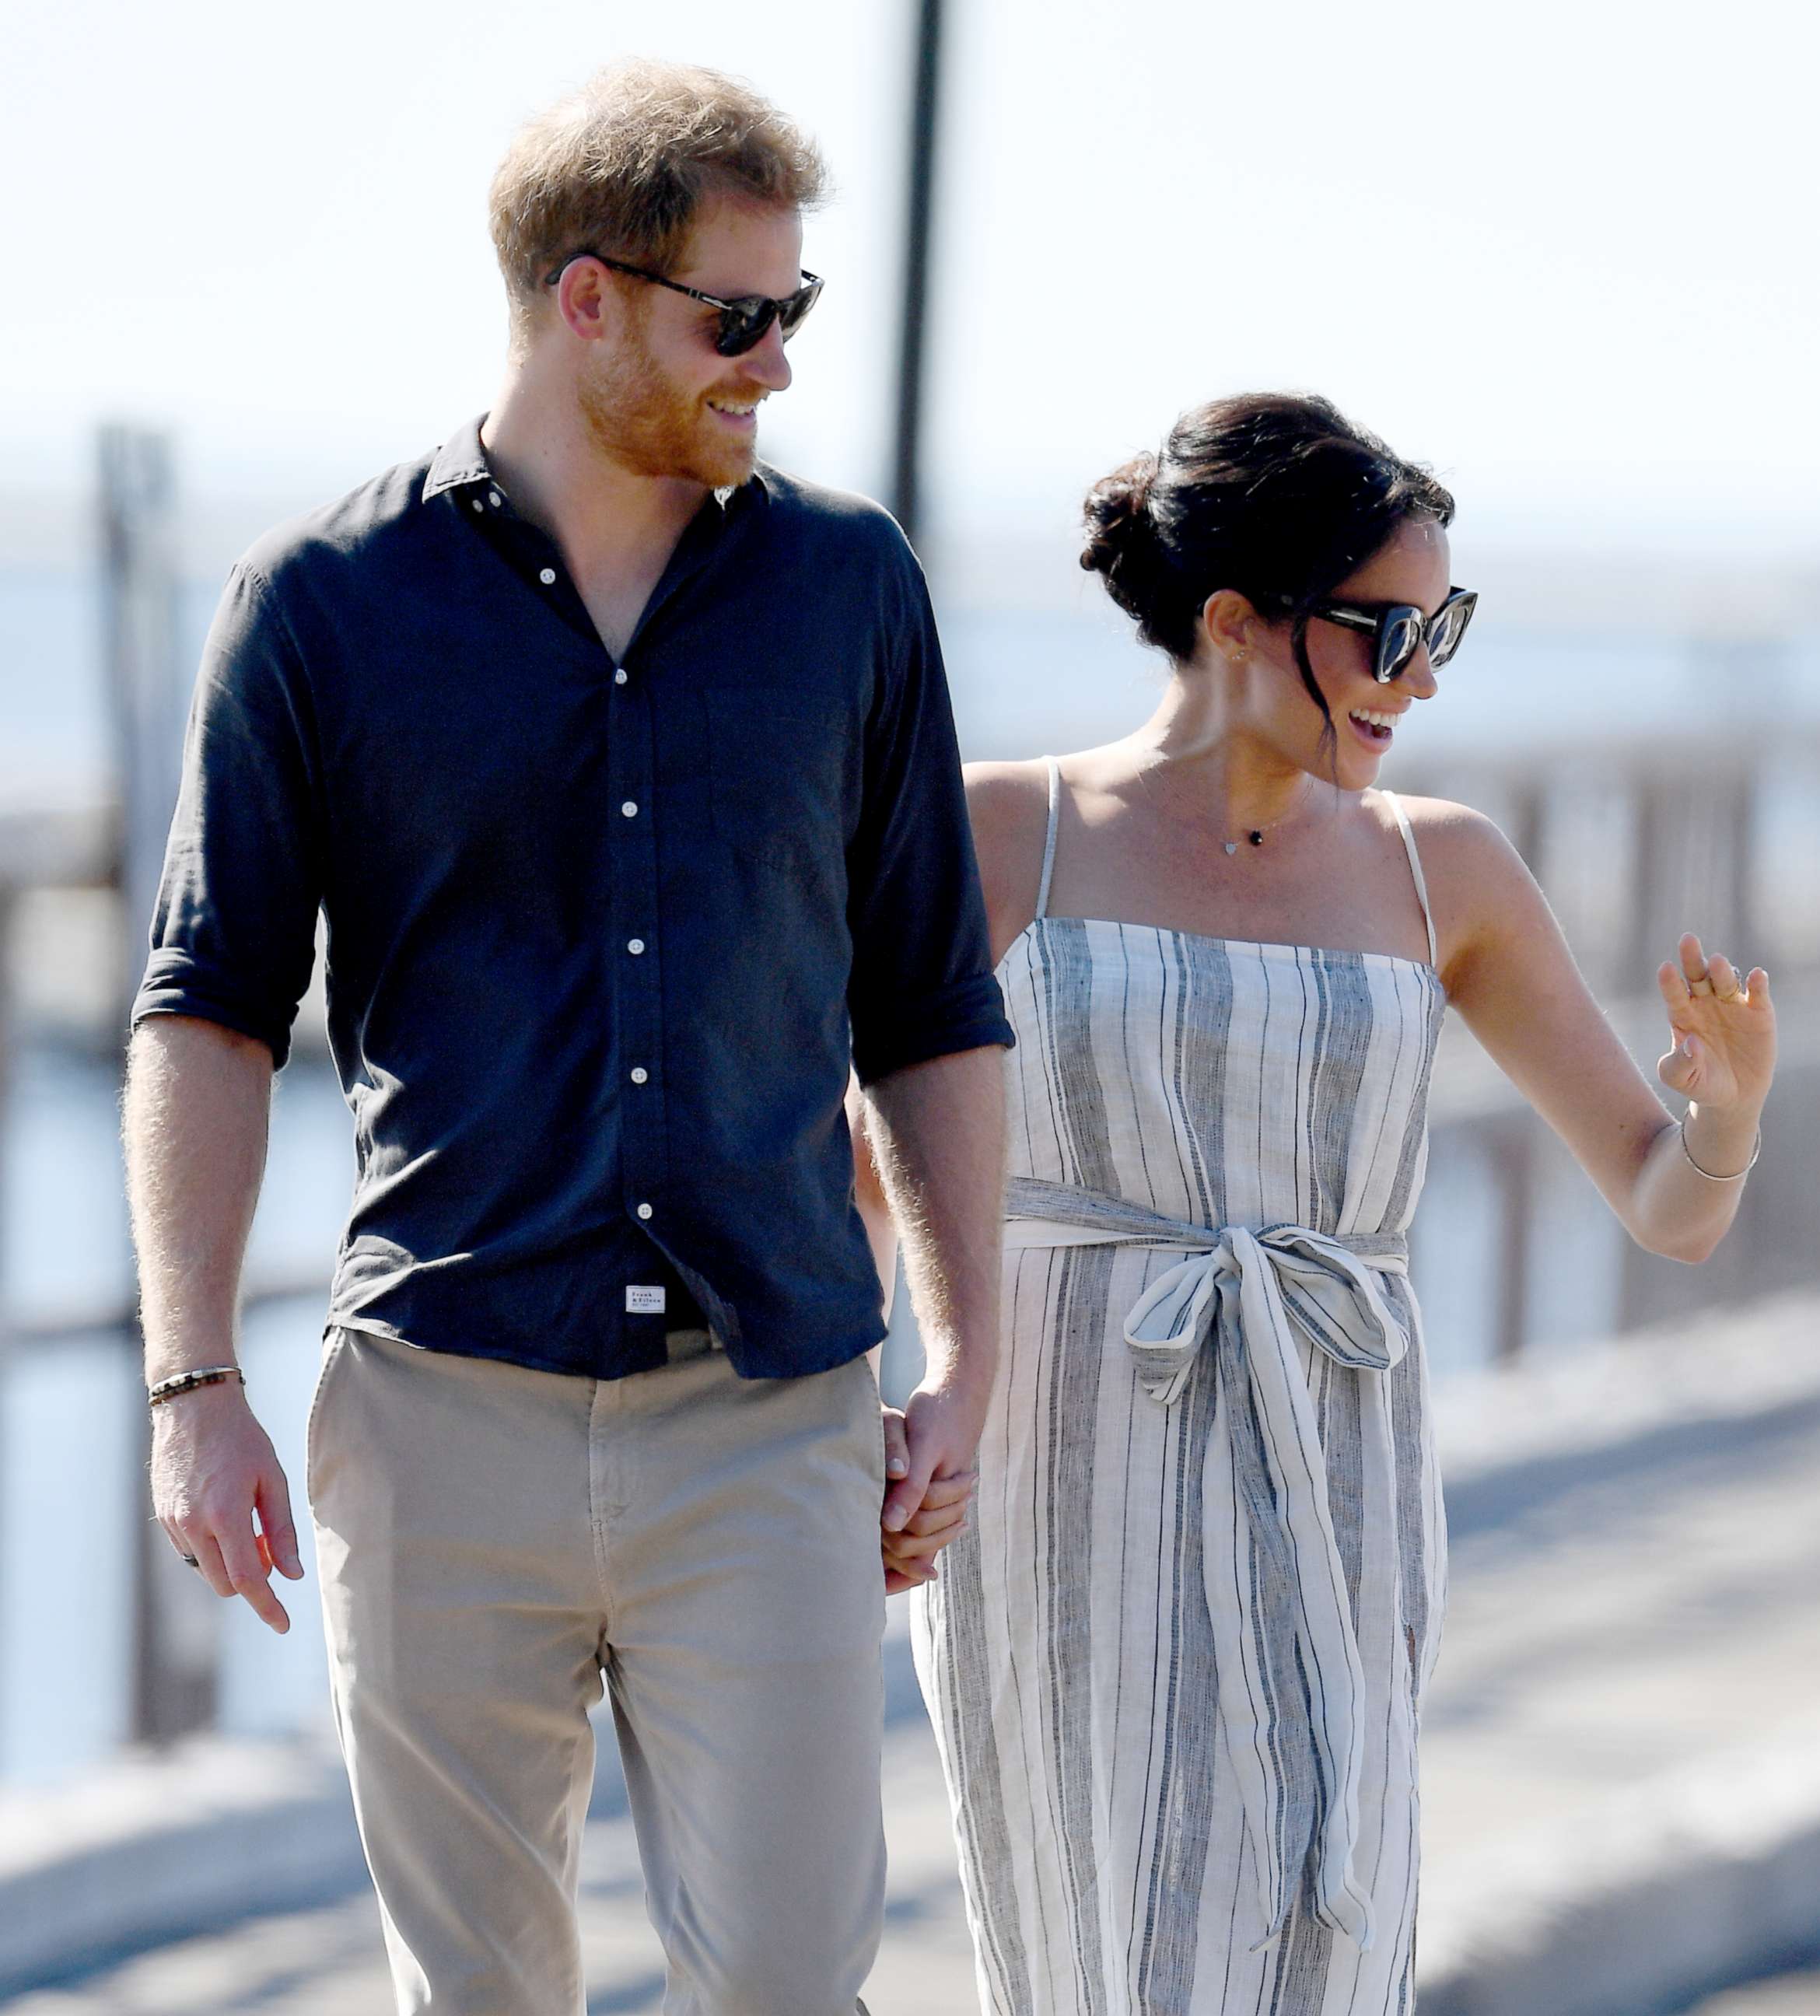 PHOTO: Prince Harry, The Duke of Sussex and Meghan Markle, The Duchess of Sussex visit Fraser Island, Australia, Oct. 22, 2018.